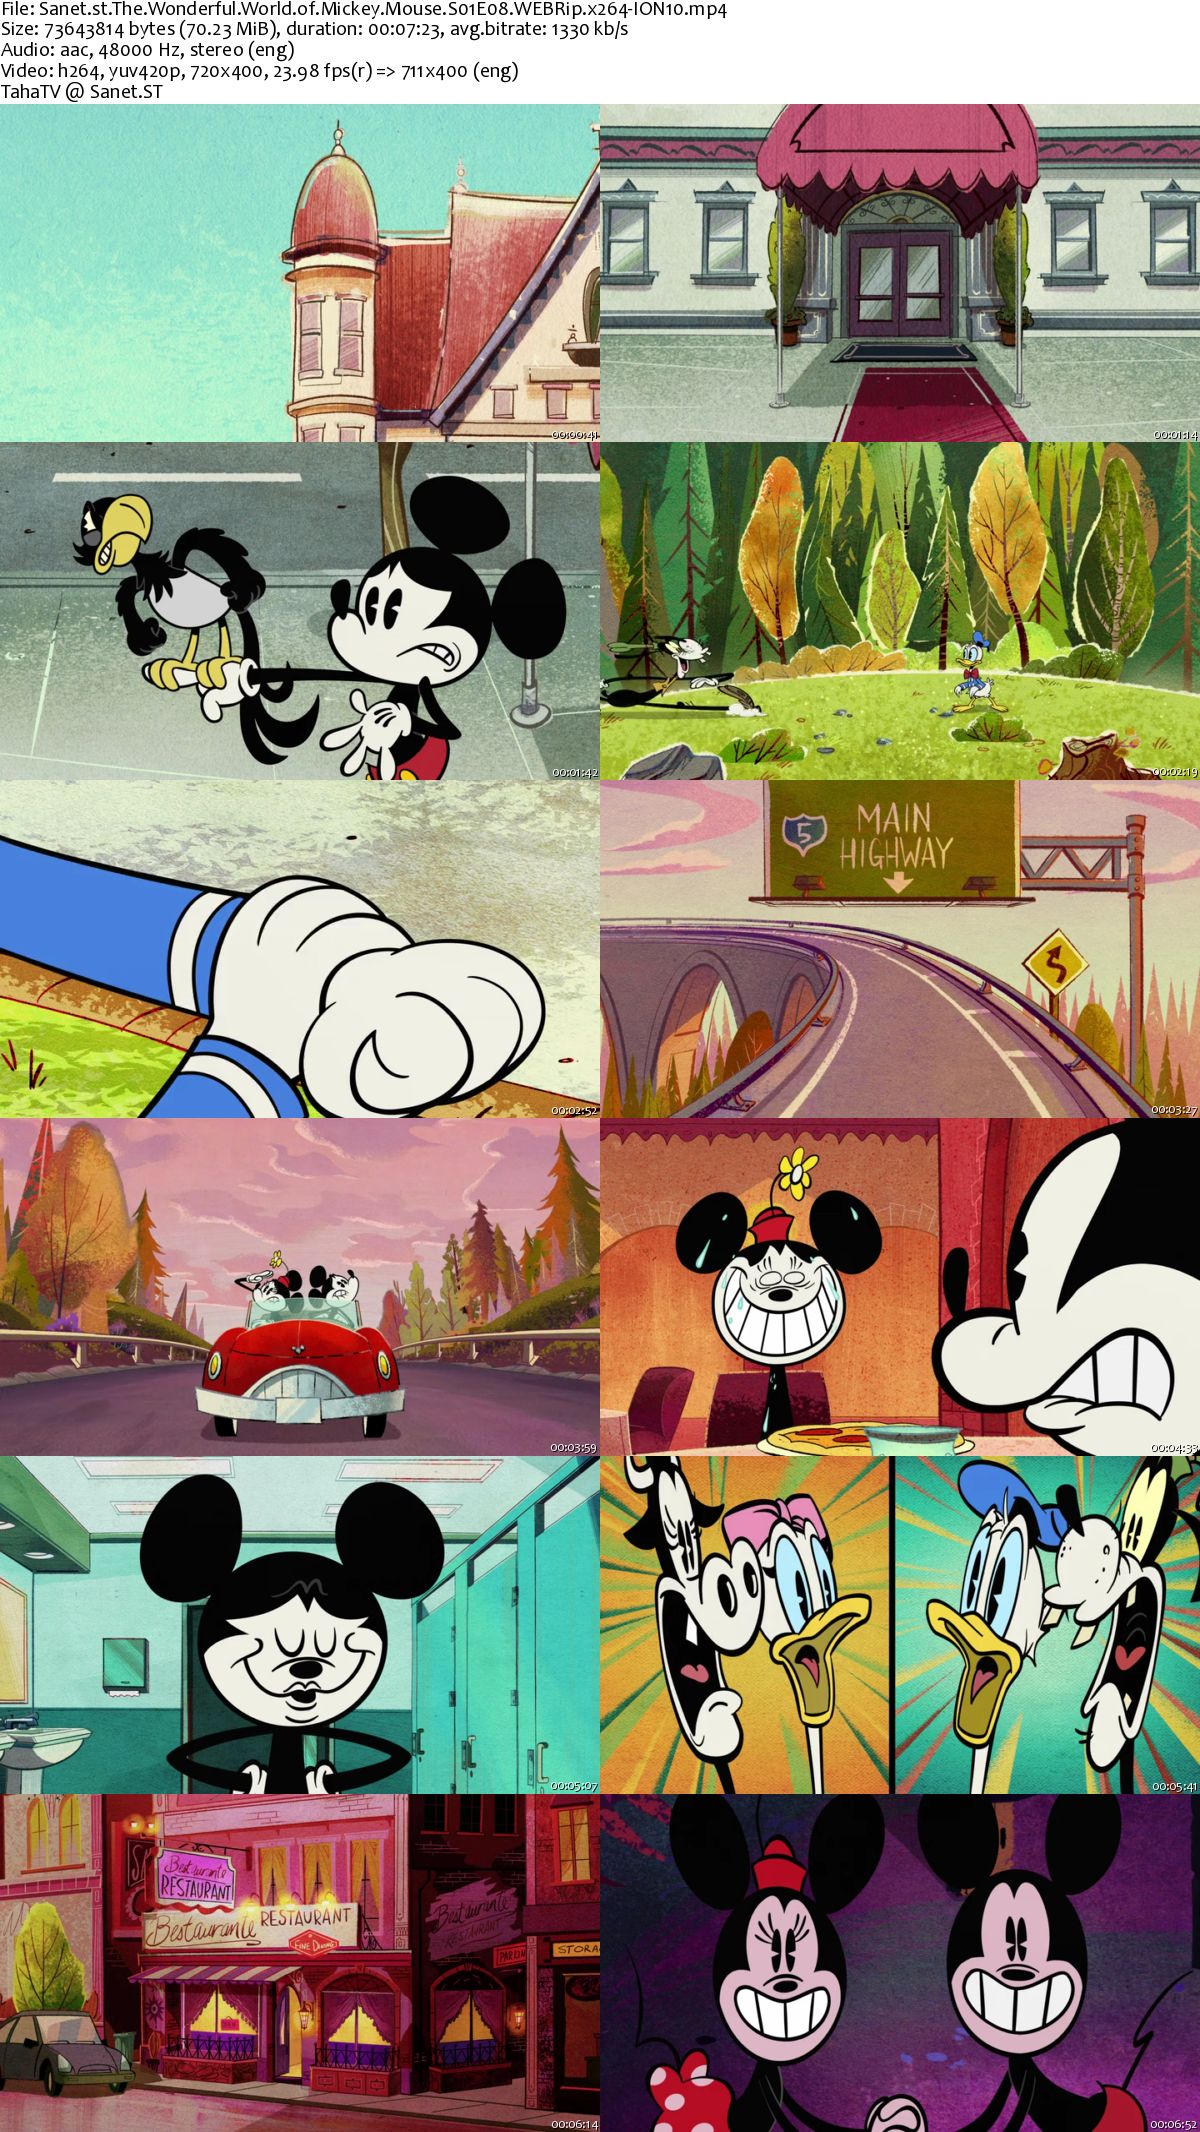 the wonderful world of mickey mouse